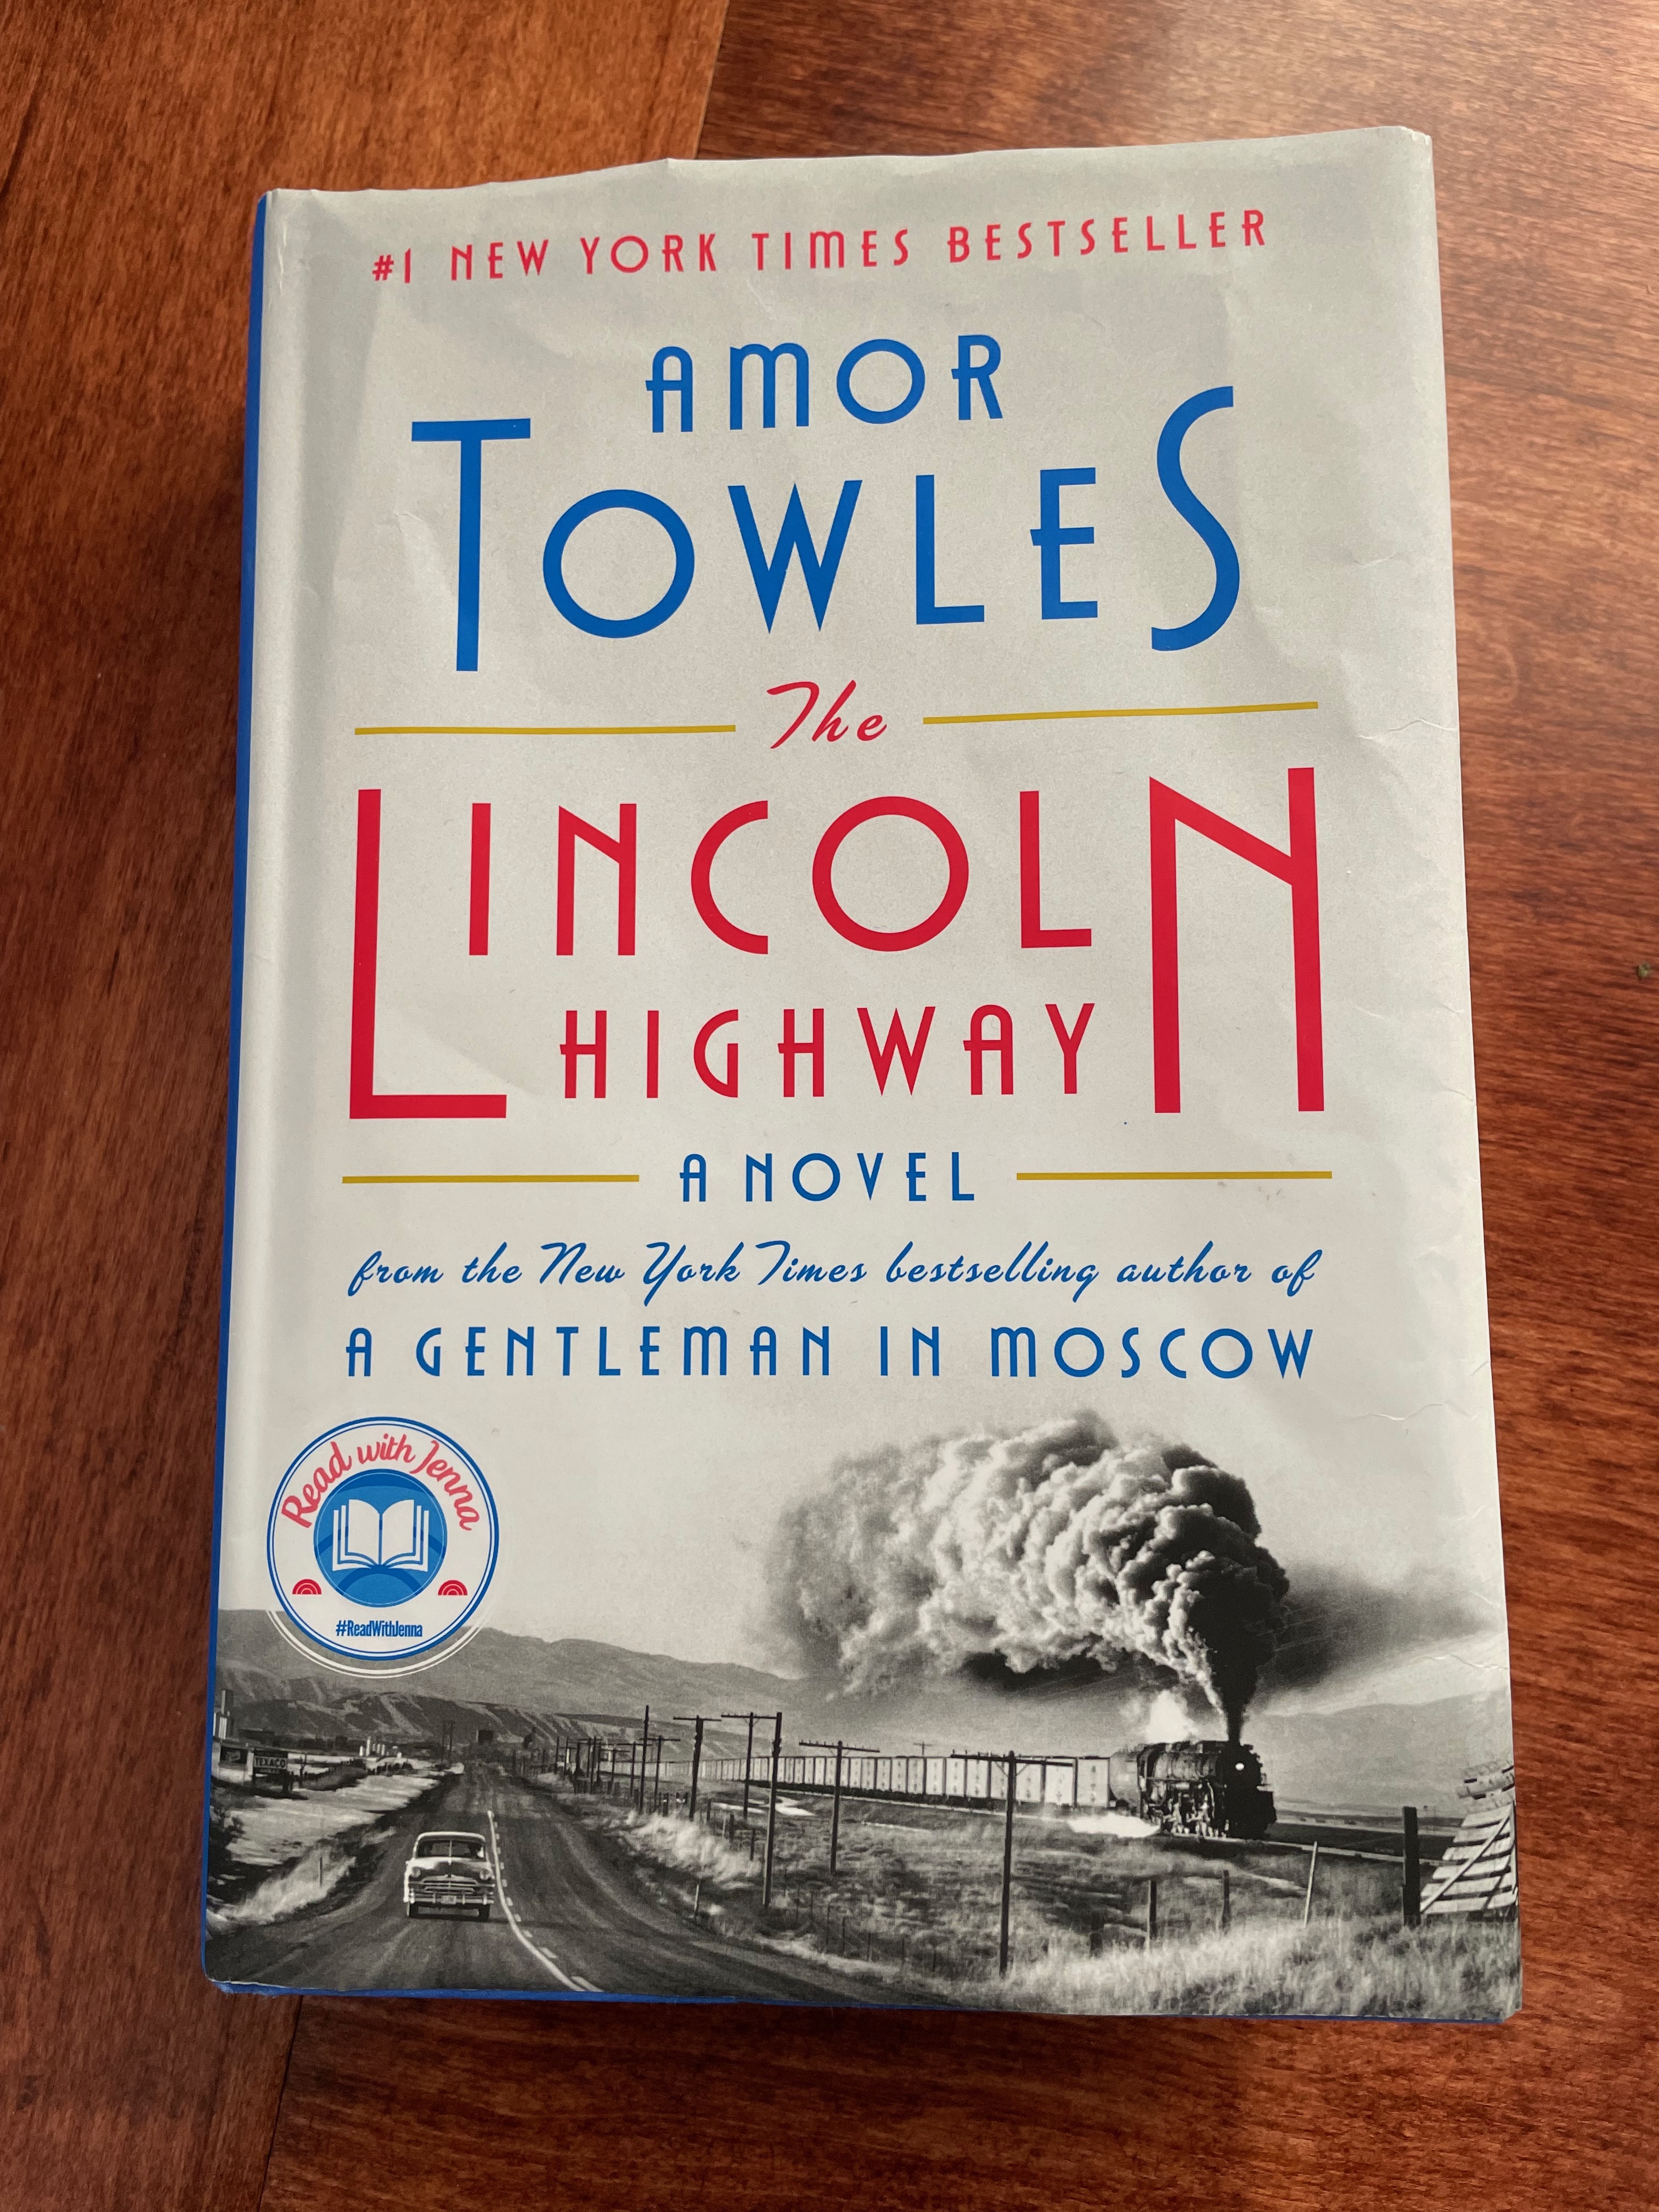 Image of The Lincoln Highway book by Amor Towles